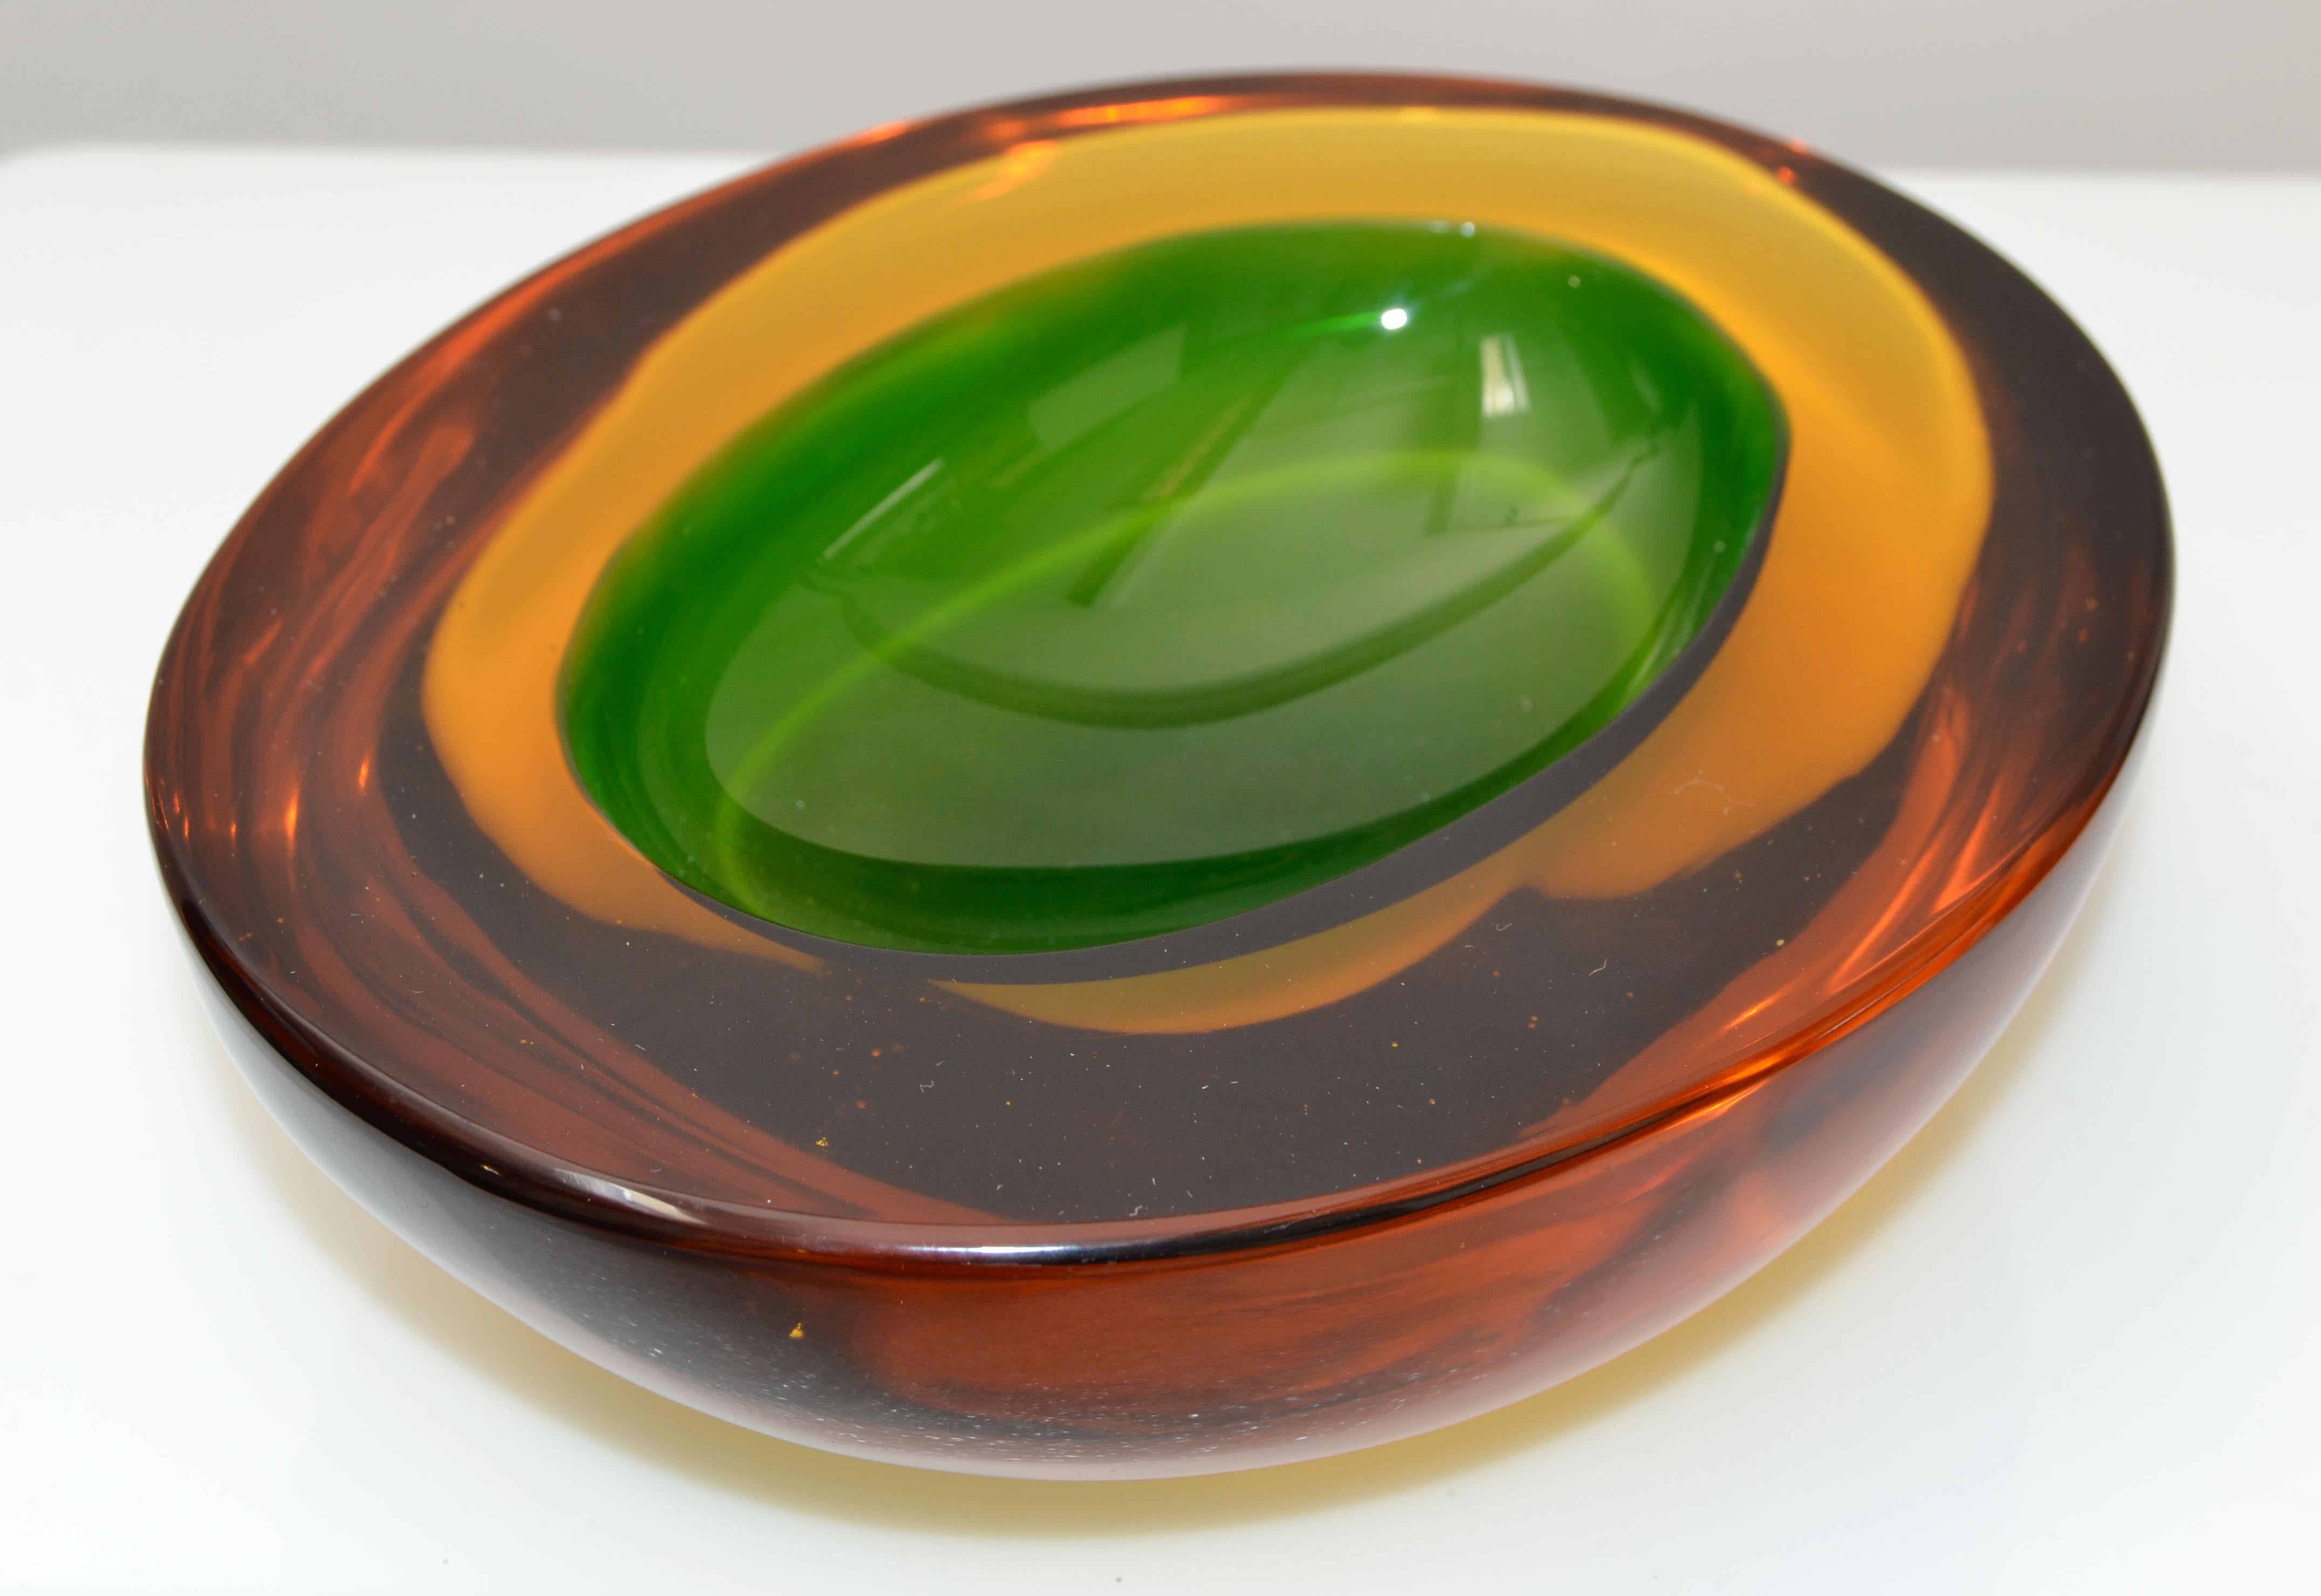 Mid-Century Modern Murano art glass bowl in red, orange and green, blown glass catchall, made in Italy.
Heavy glass bowl with outstanding details.